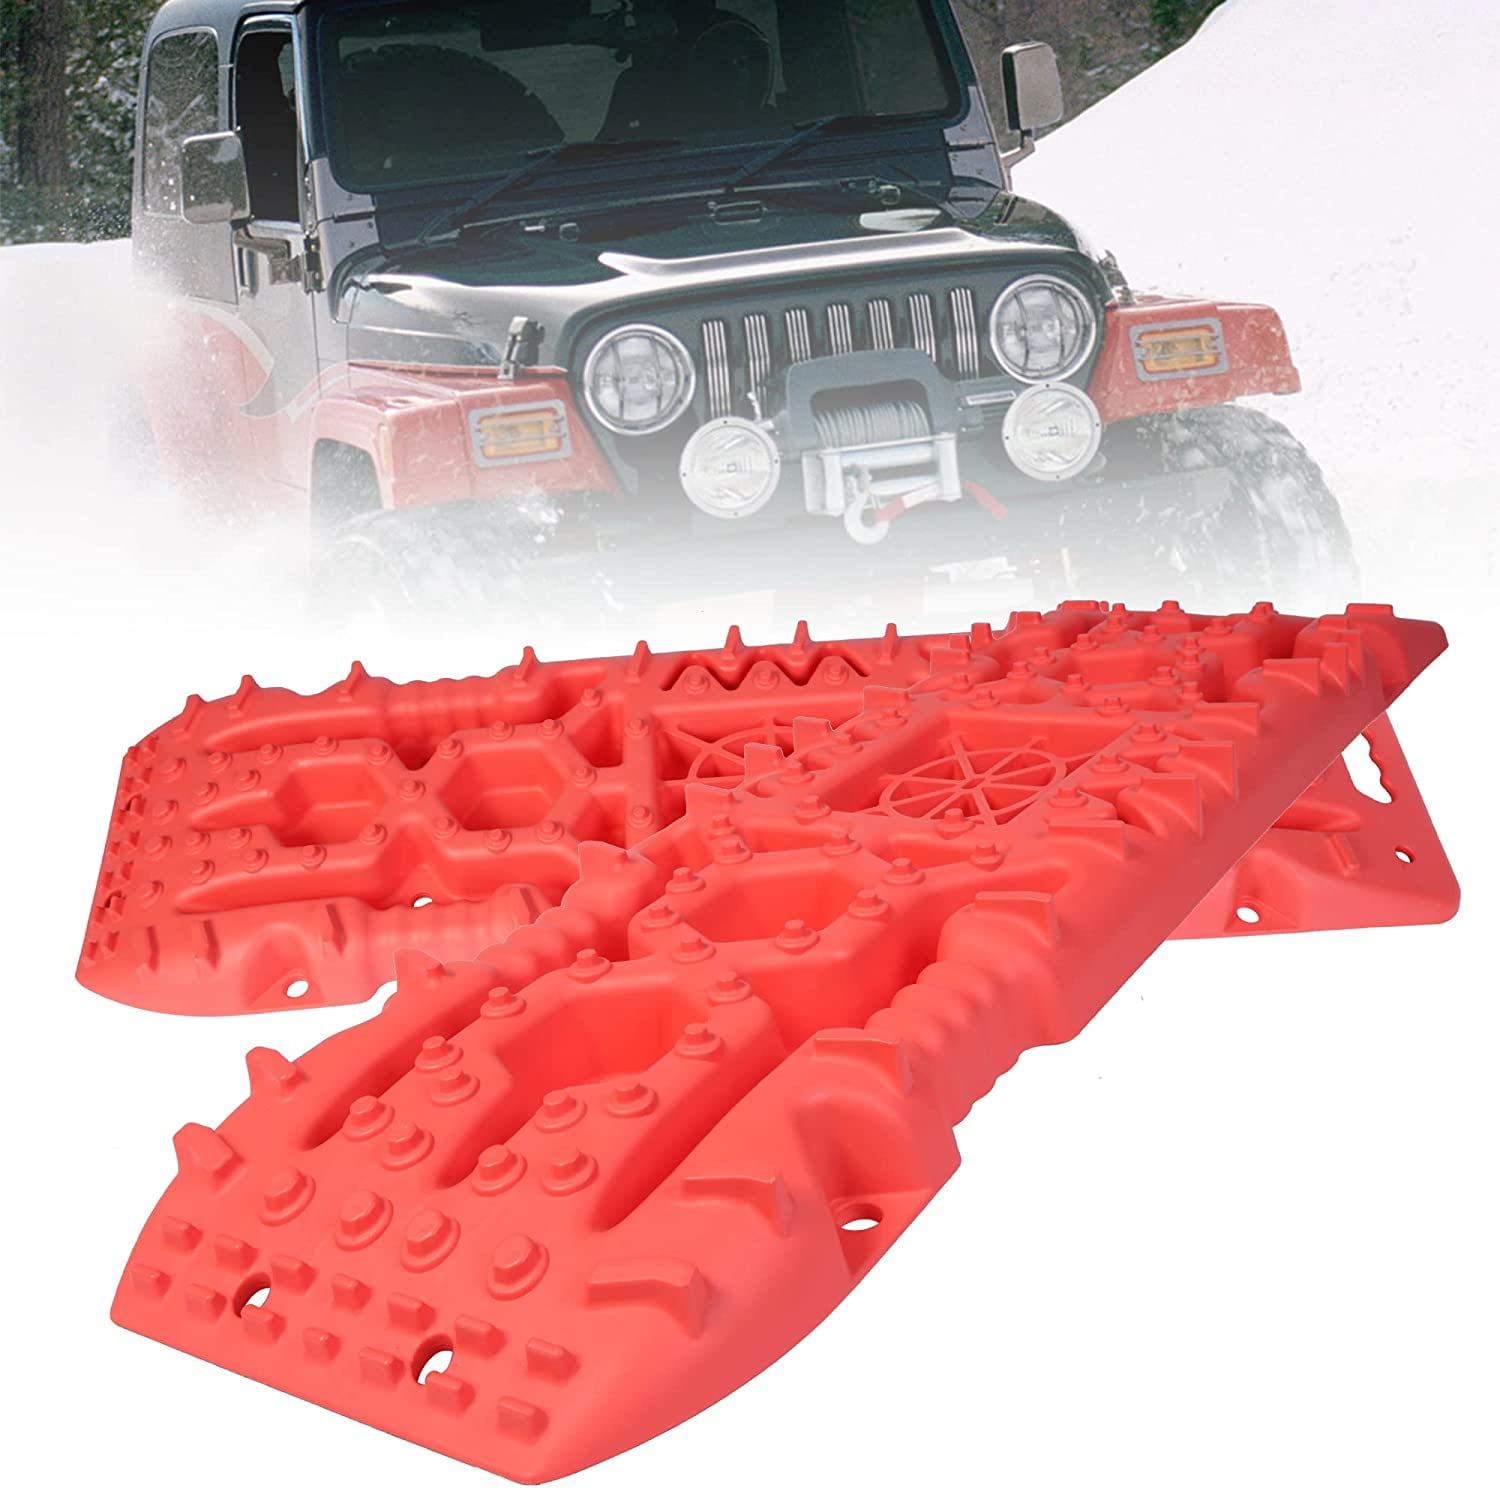 2 Pcs Tire Ladder Recovery Traction Tracks Mats Sand Mud Snow Rescue for Off-Road Green Kanruis Traction Boards with Jack Lift Base 